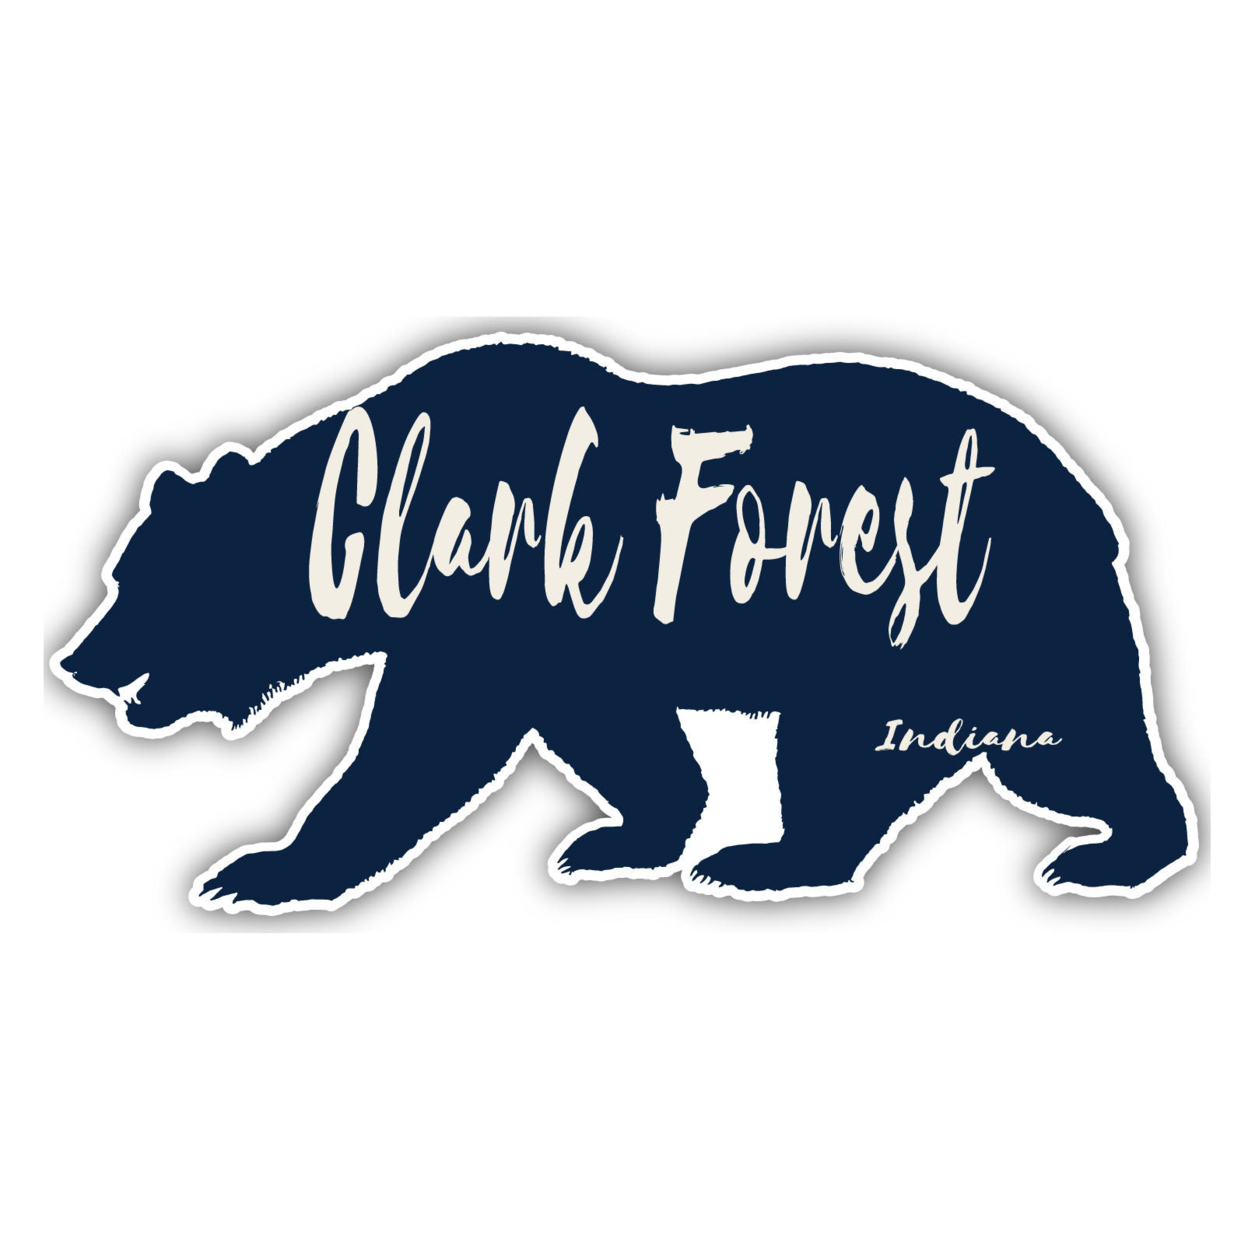 Clark Forest Indiana Souvenir Decorative Stickers (Choose Theme And Size) - Single Unit, 12-Inch, Bear